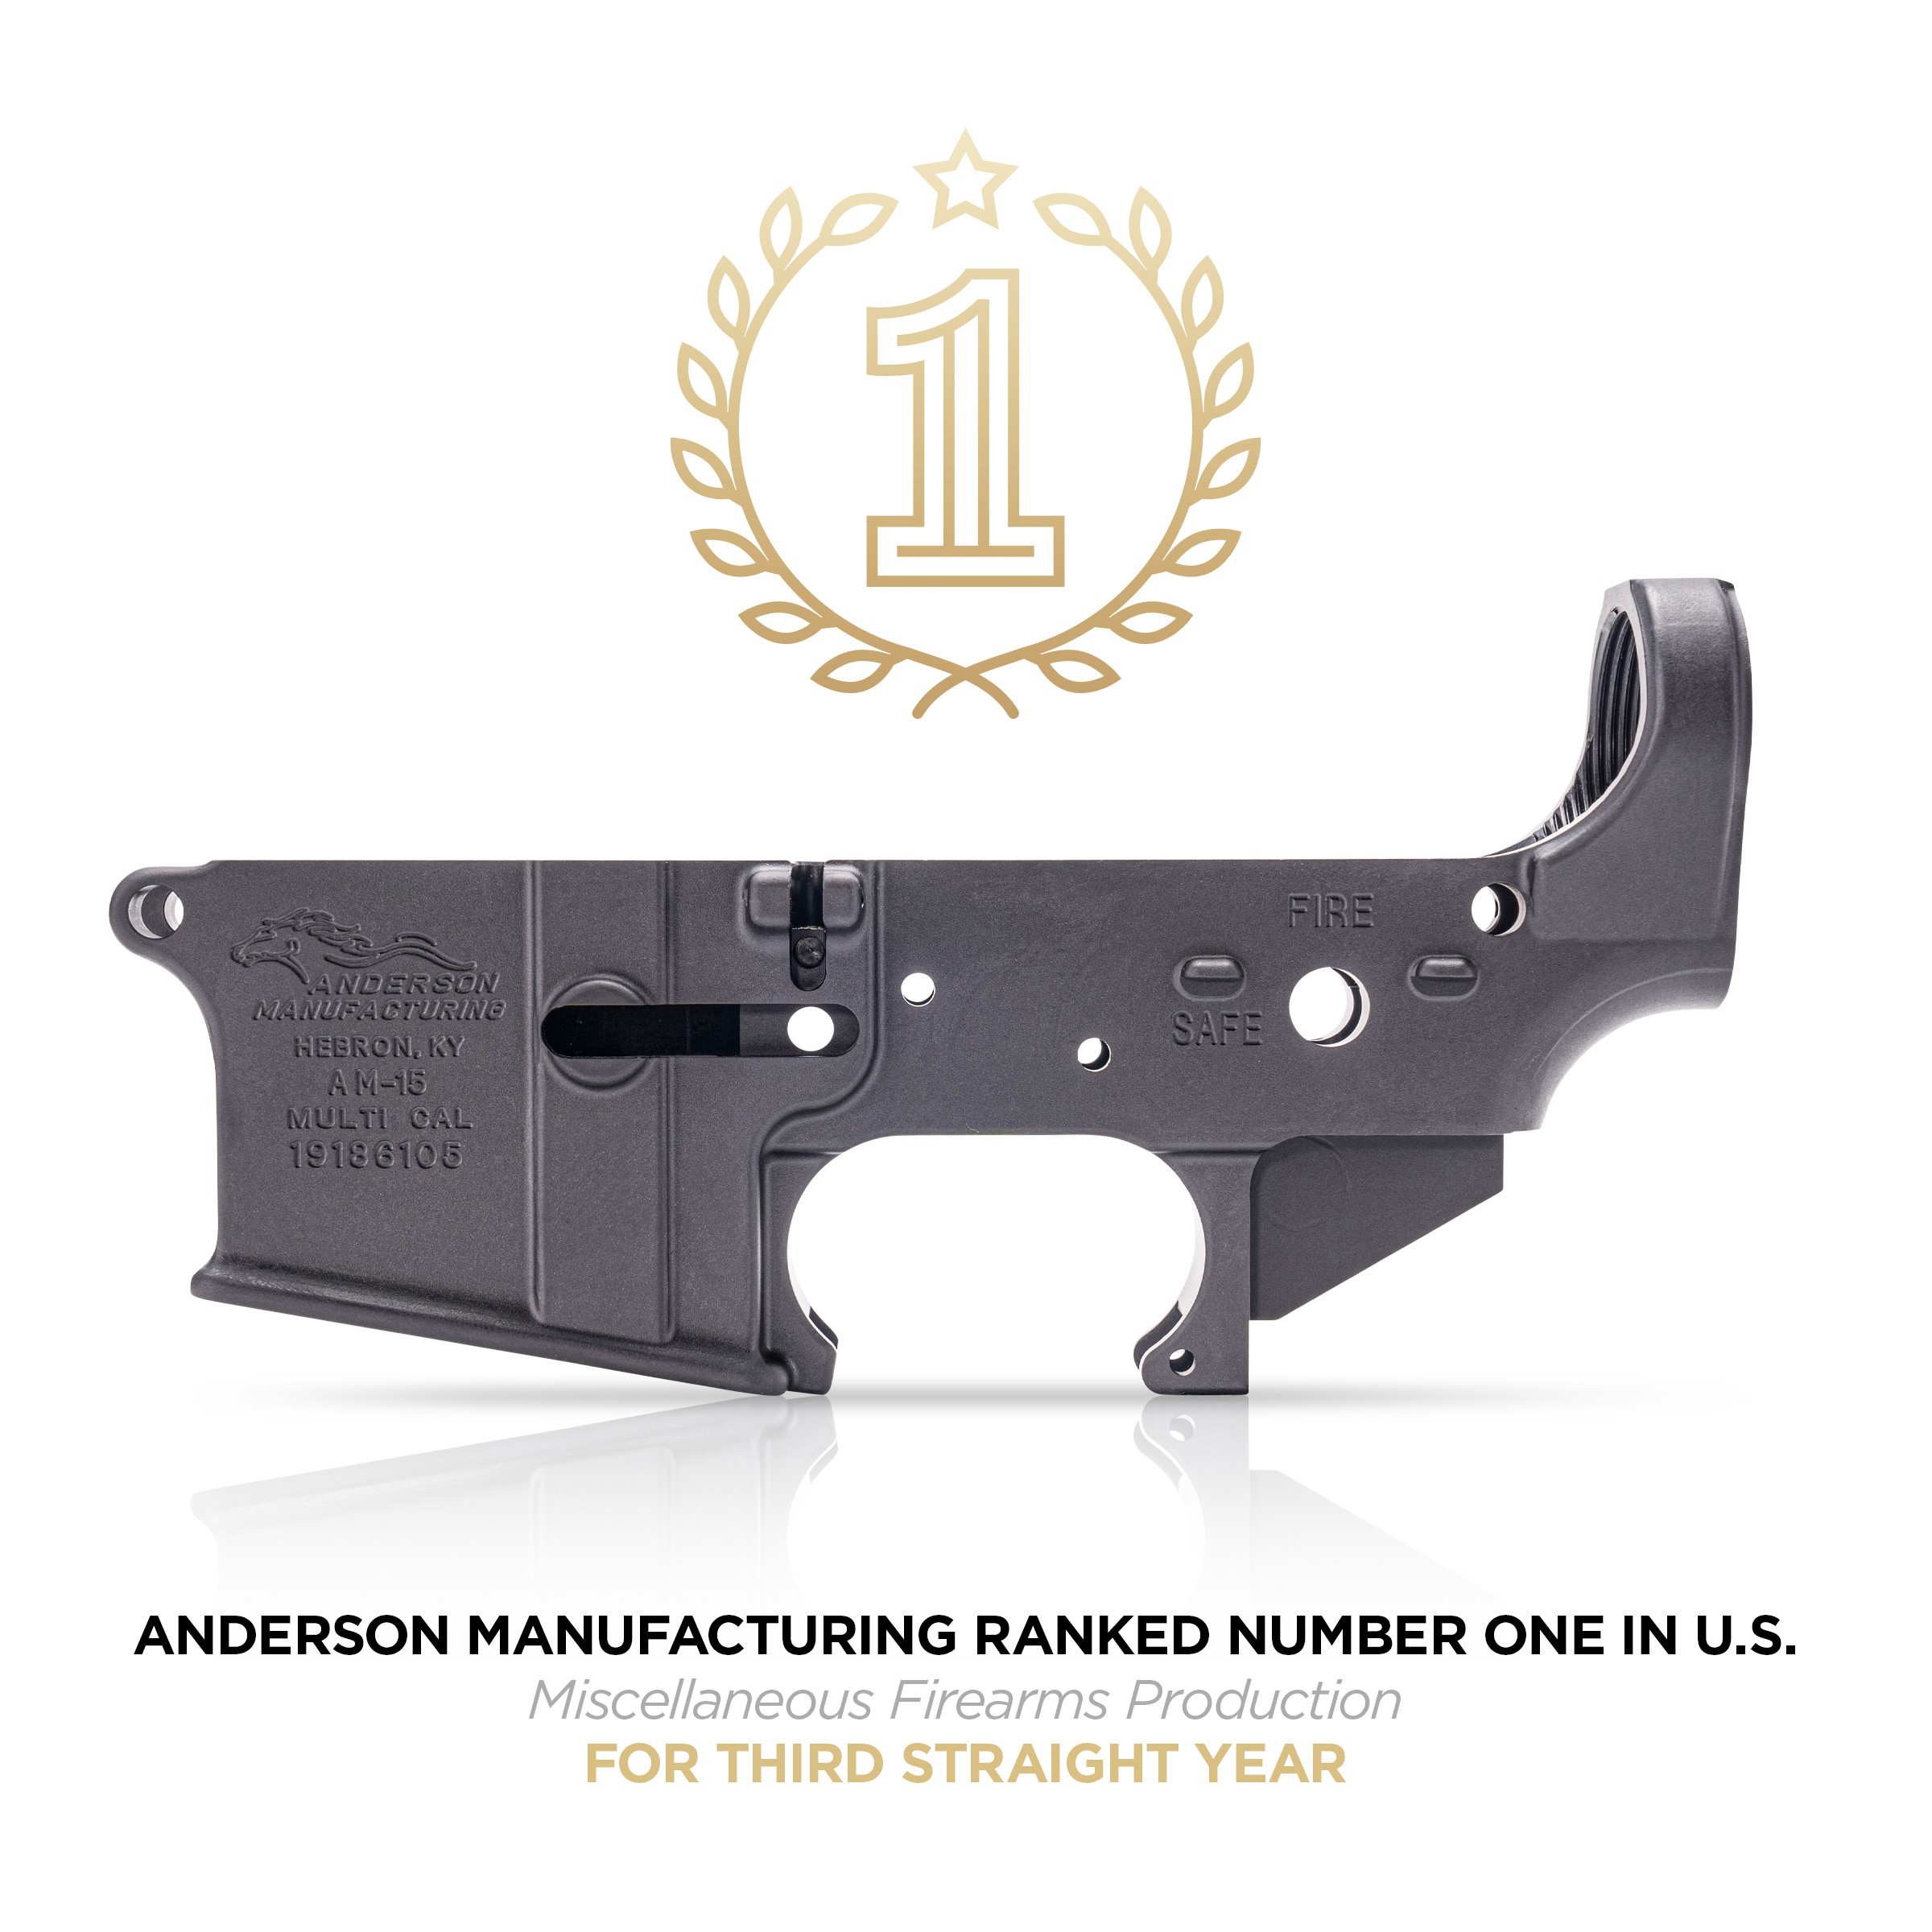 ANDERSON MANUFACTURING RANKED NUMBER ONE IN  U.S. MISCELLANEOUS FIREARMS PRODUCTION FOR THIRD STRAIGHT YEAR 